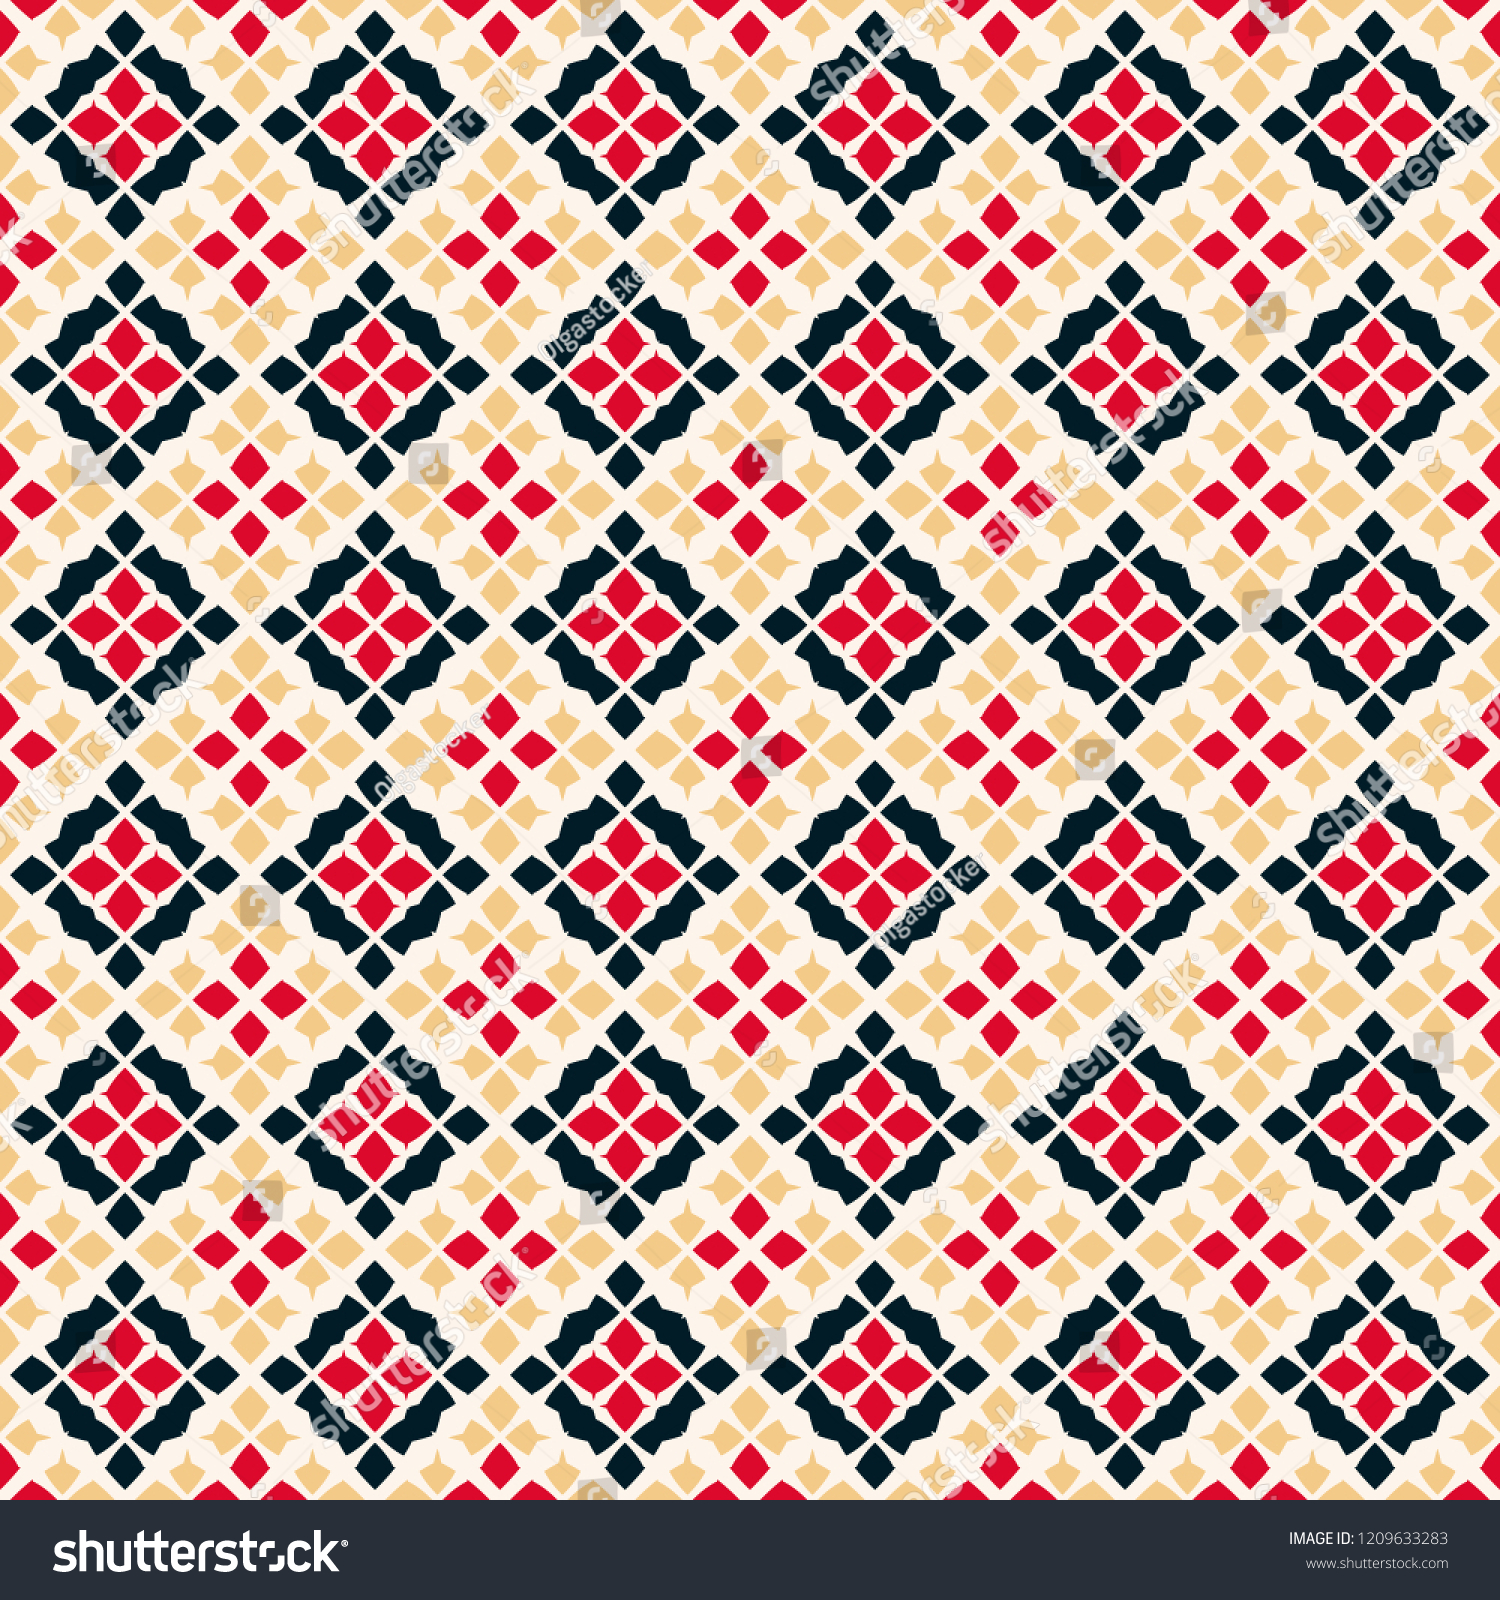 SVG of Vector geometric seamless pattern. Traditional folk ornament. Texture with small rhombuses, flower shapes, diamonds. Tribal ethnic motif. Red, black, yellow and white colors. Repeatable background svg